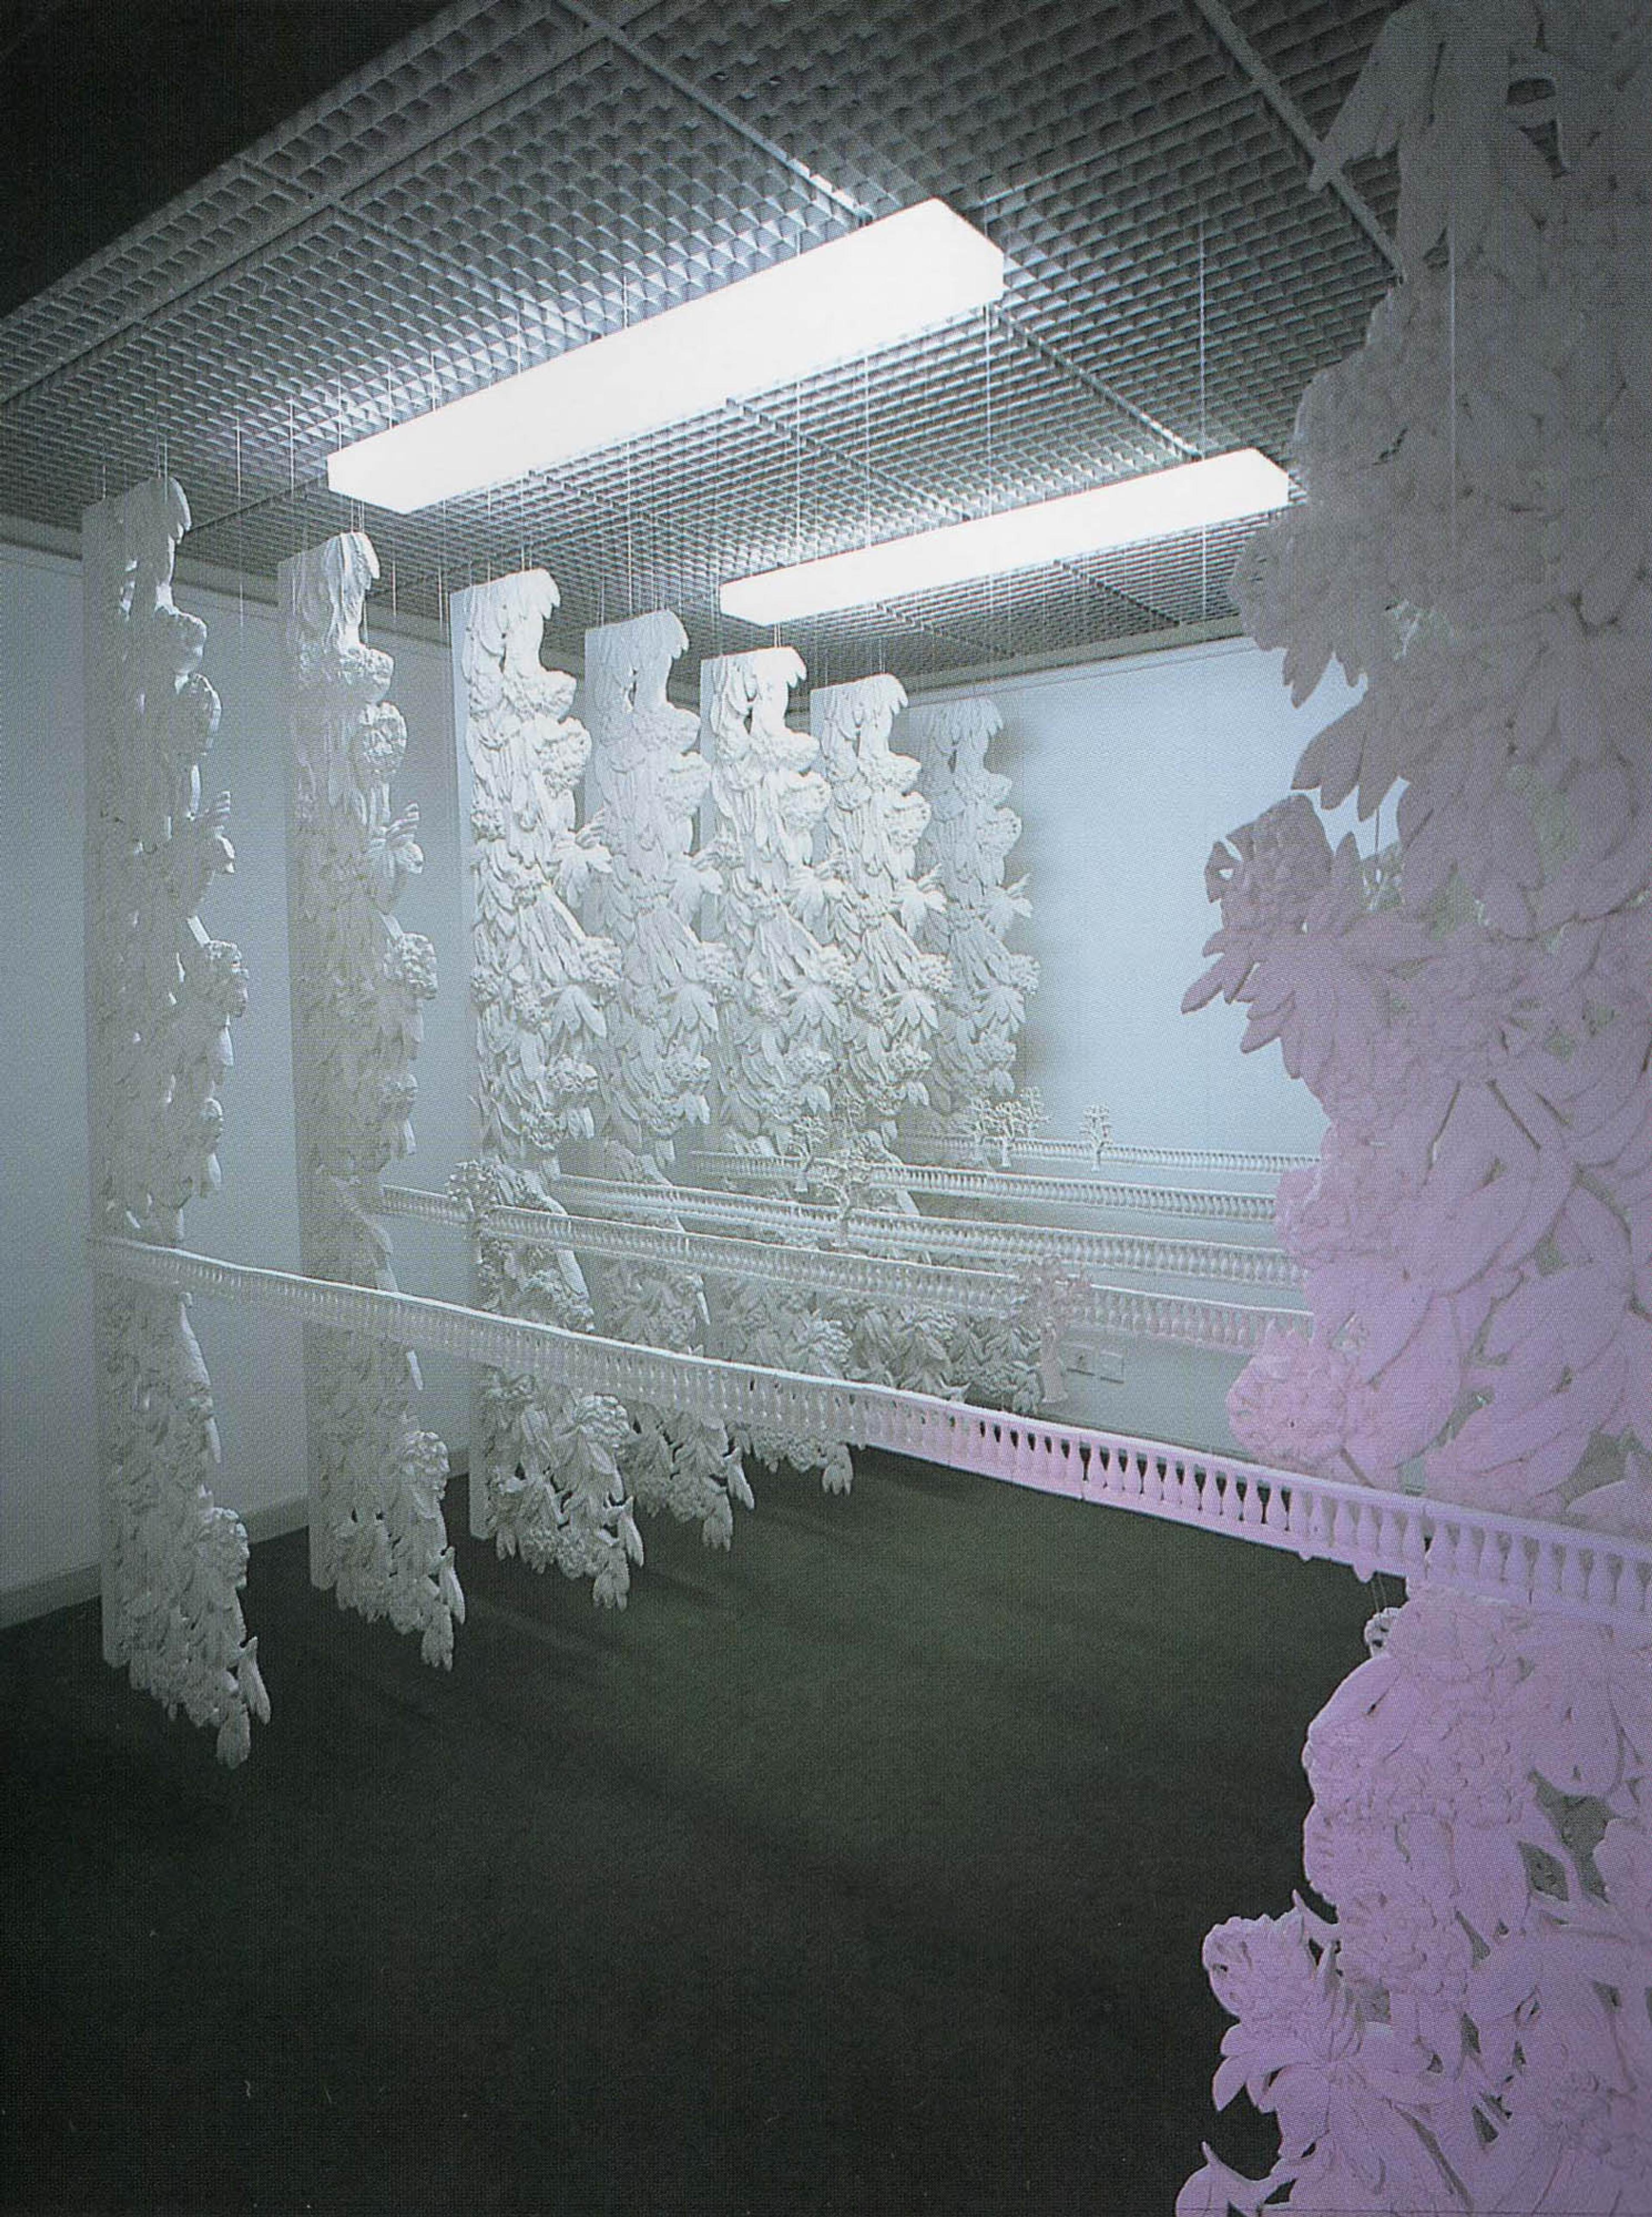 (1998) Daphne Wright, Looking for the Home of the Sickness, 1991-1992, metal and sound, 427 x 488 cm.